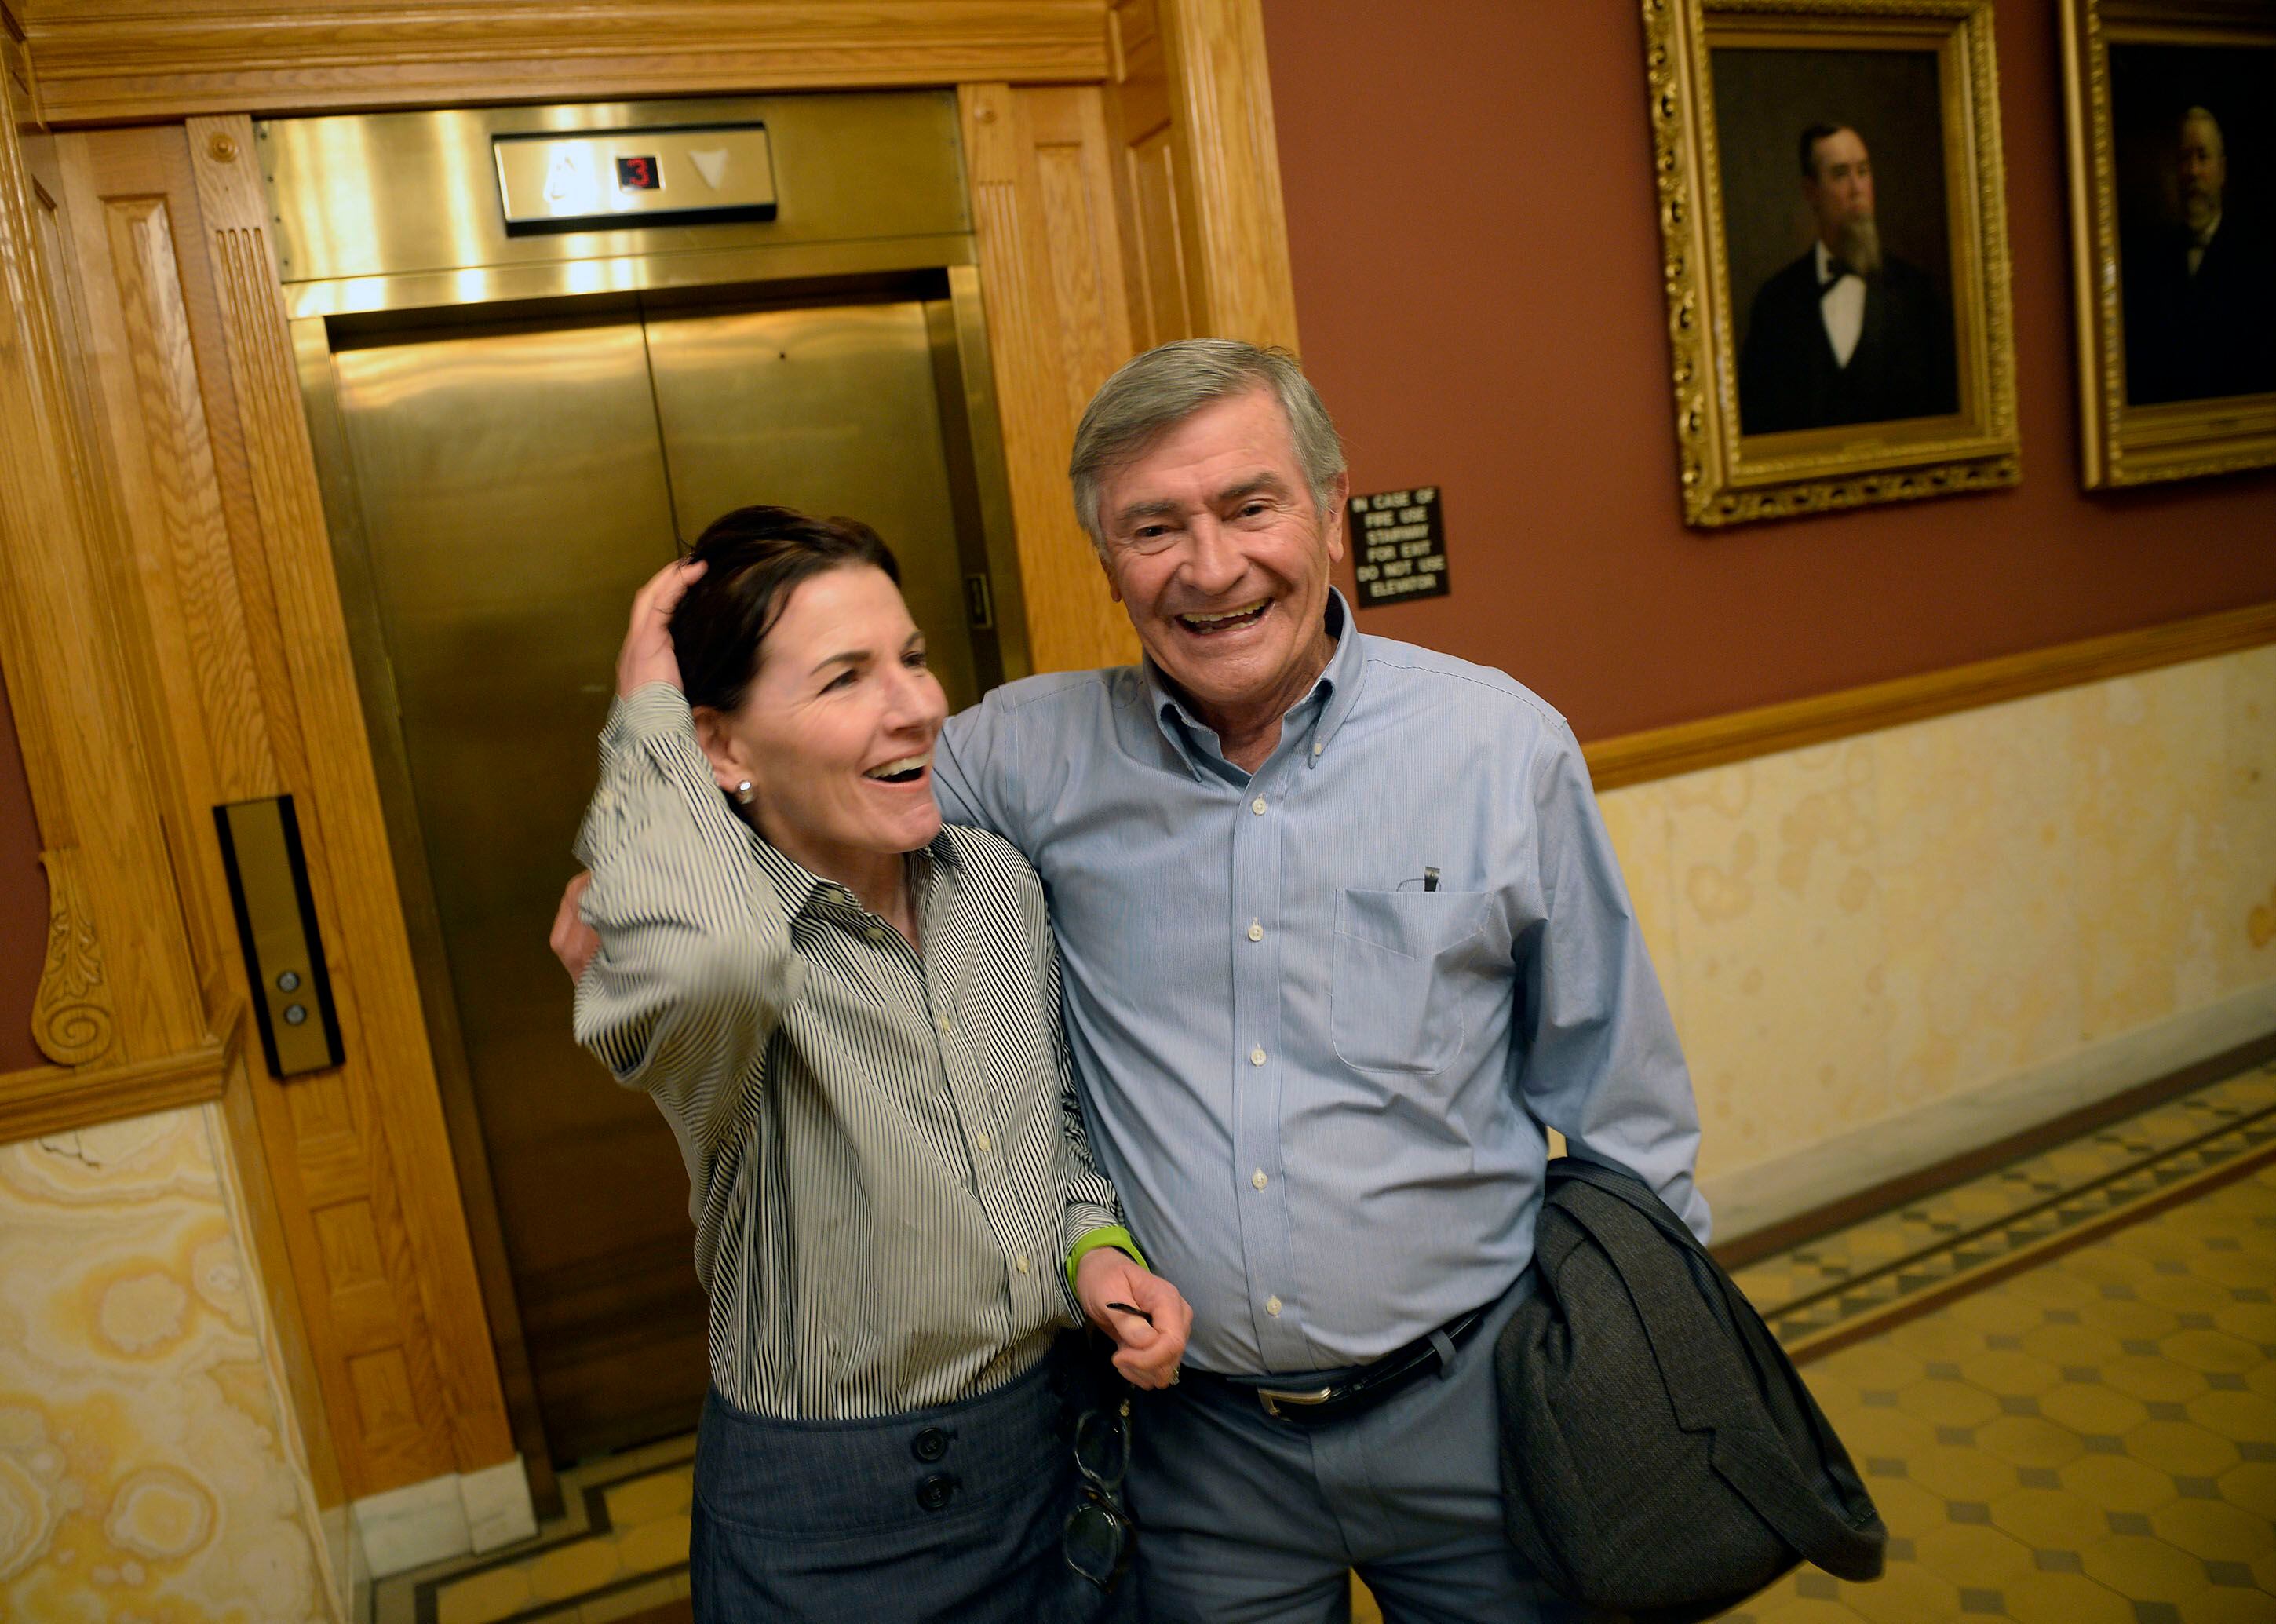 Al Hartmann  |  The Salt Lake Tribune
Former Salt Lake City Mayor Ted Wilson, seen here in a 2007 photo, with his wife Holly Mullen at the City-County building, which he helped preserve during his tenure as mayor. Wilson died Thursday at age 84.